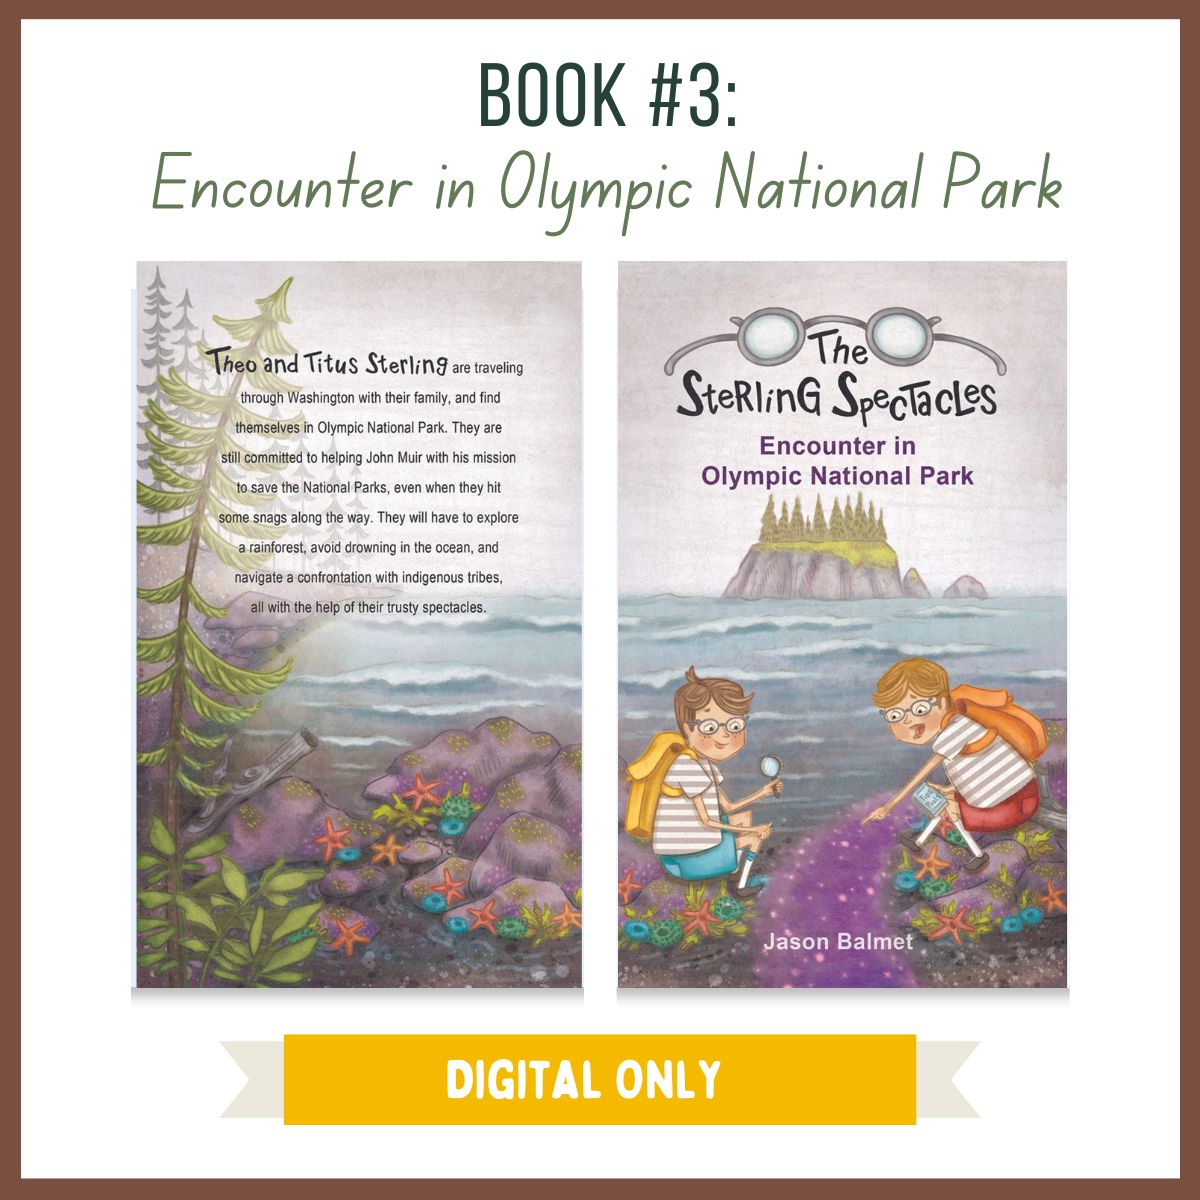 Book #3: Encounter in Olympic National Park - DIGITAL